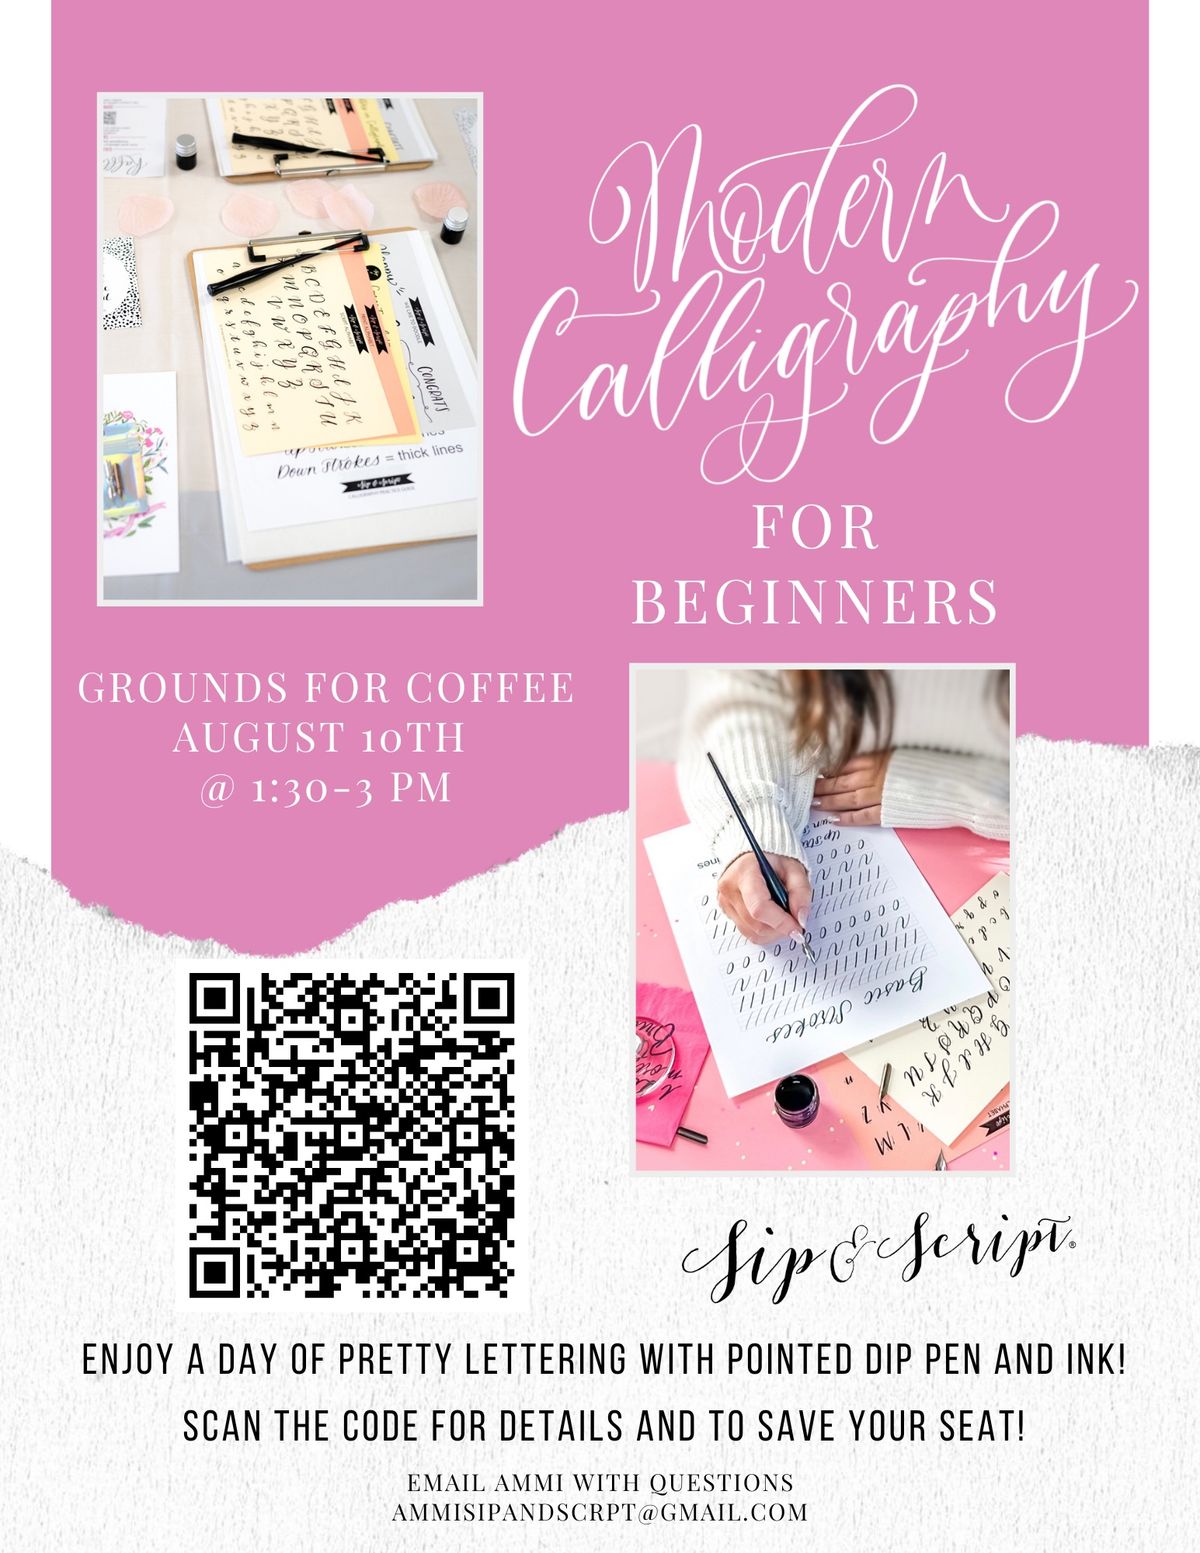 Modern Calligraphy for Beginners and Canvas Bag Lettering @ Grounds for Coffee